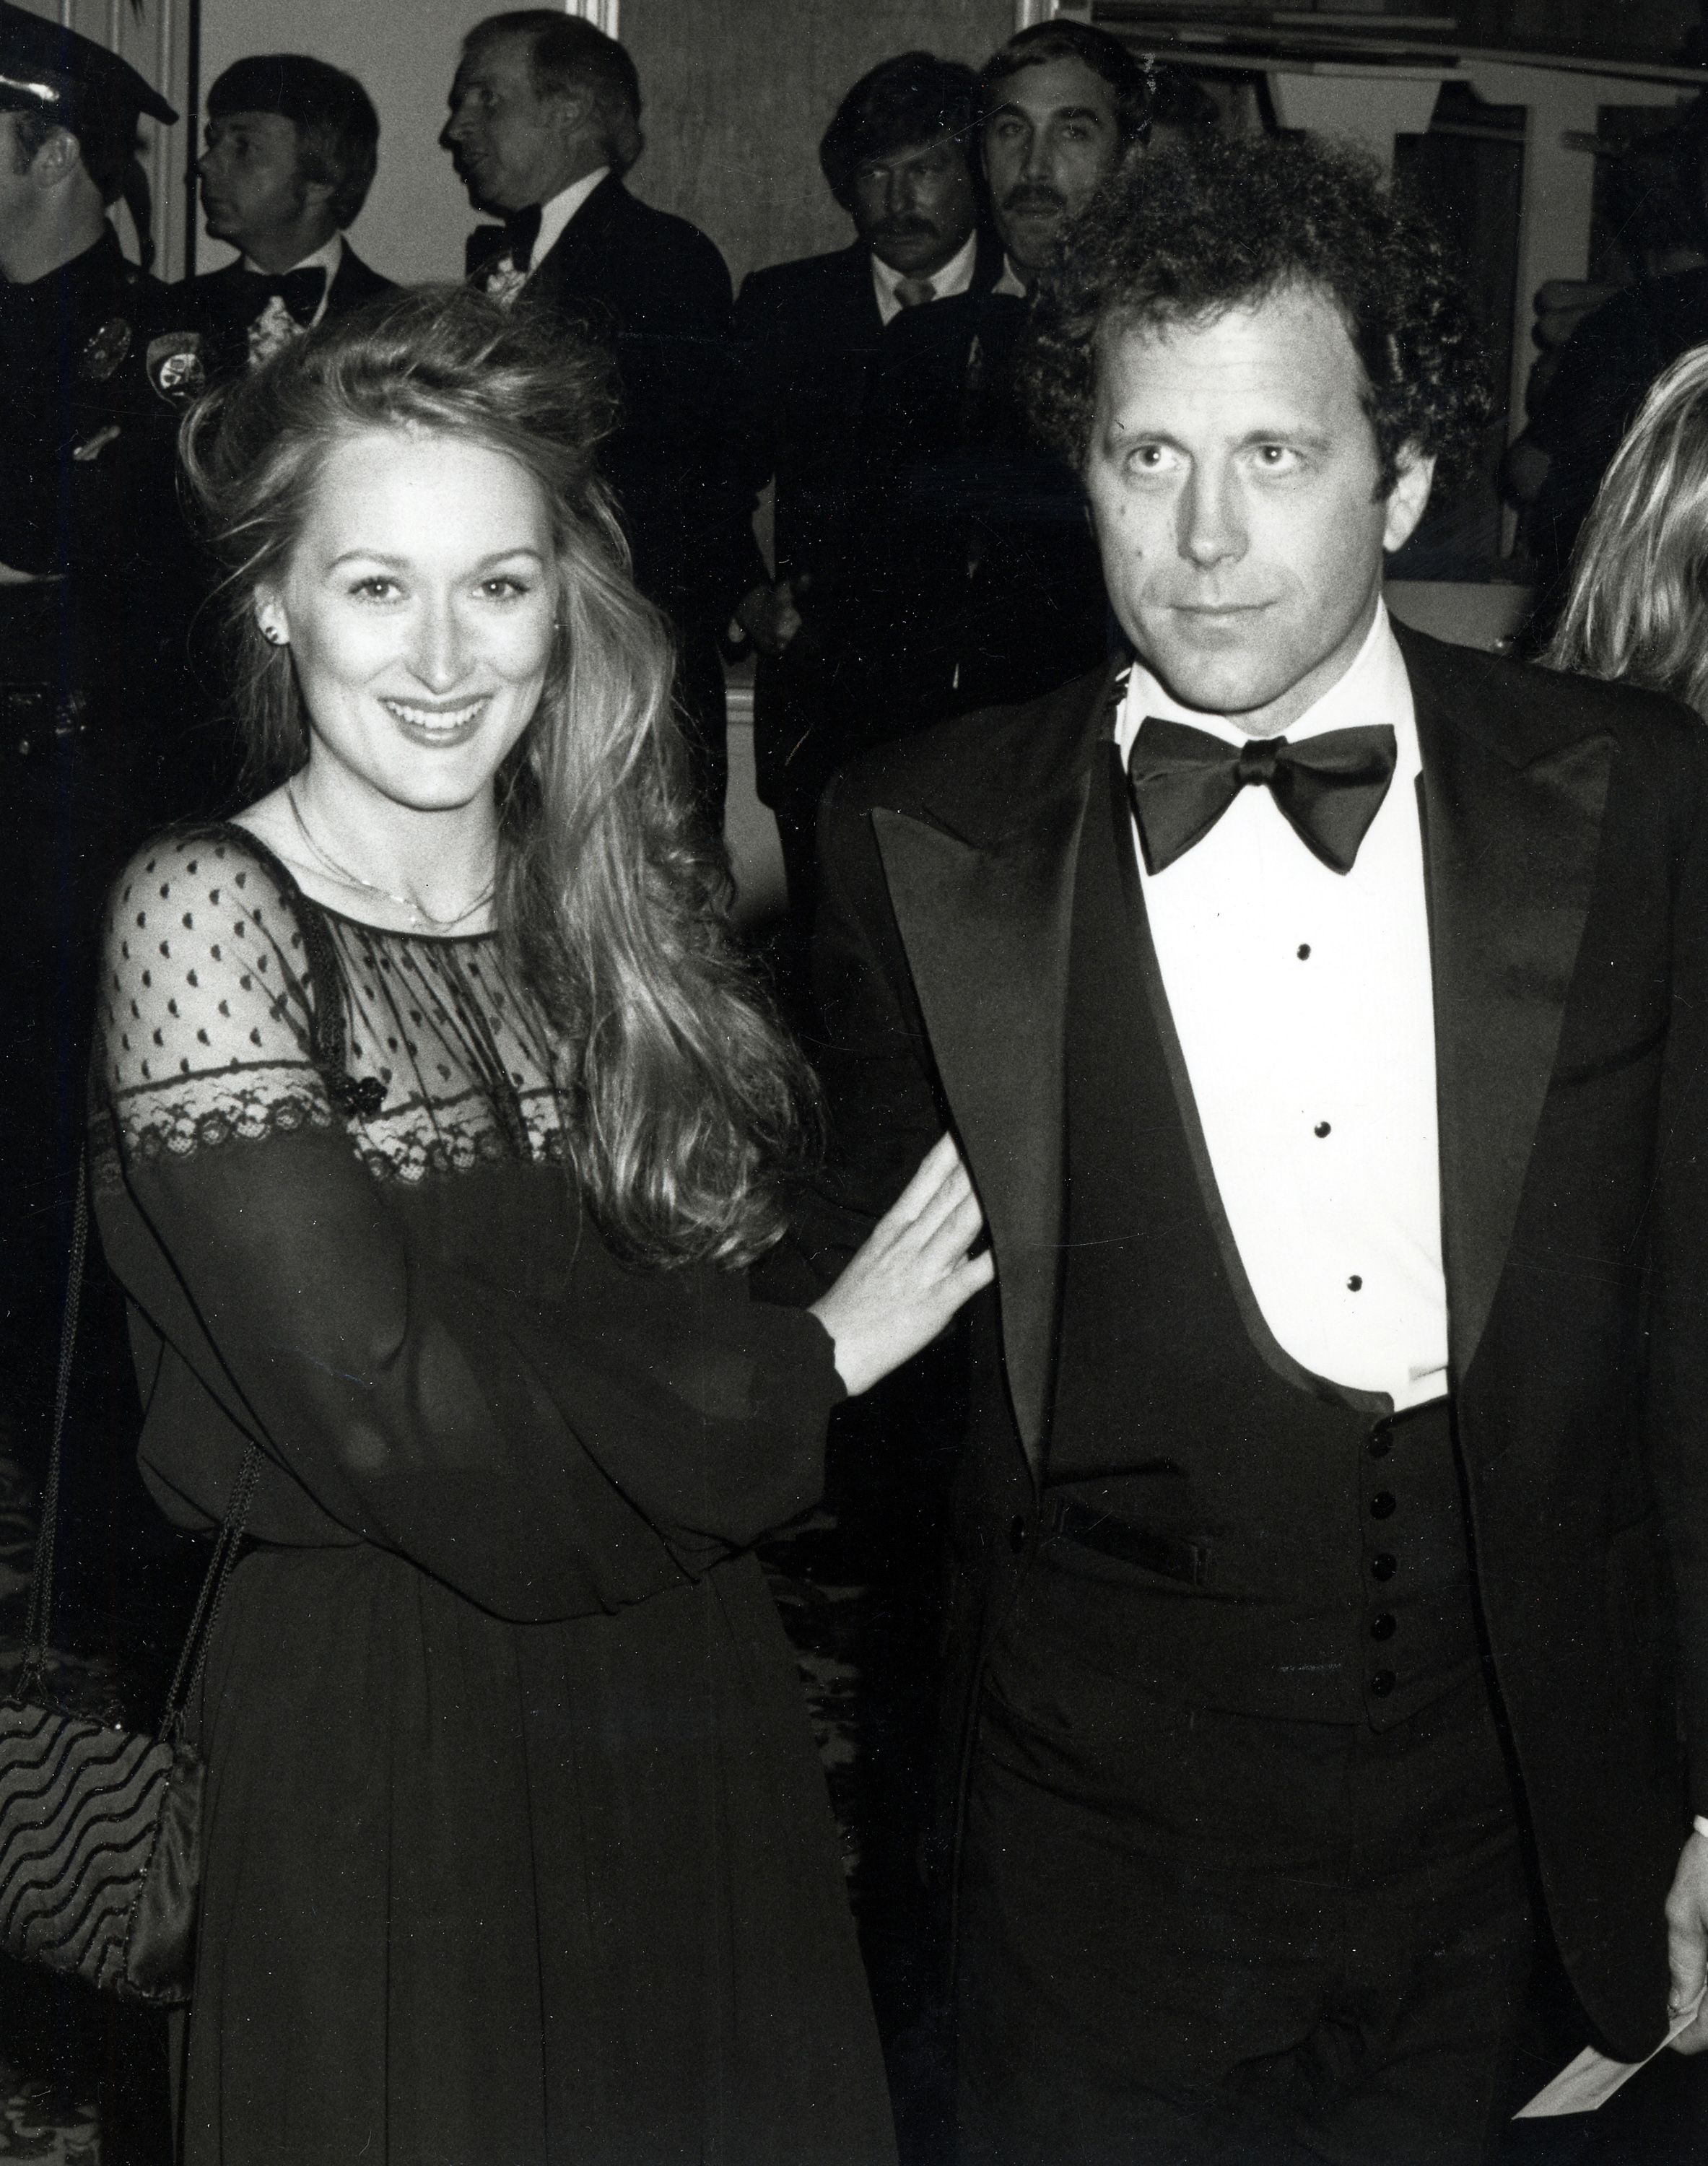 Meryl Streep and Don Gummer at the 51st Annual Academy Awards in 1979 in Los Angeles | Source: Getty Images